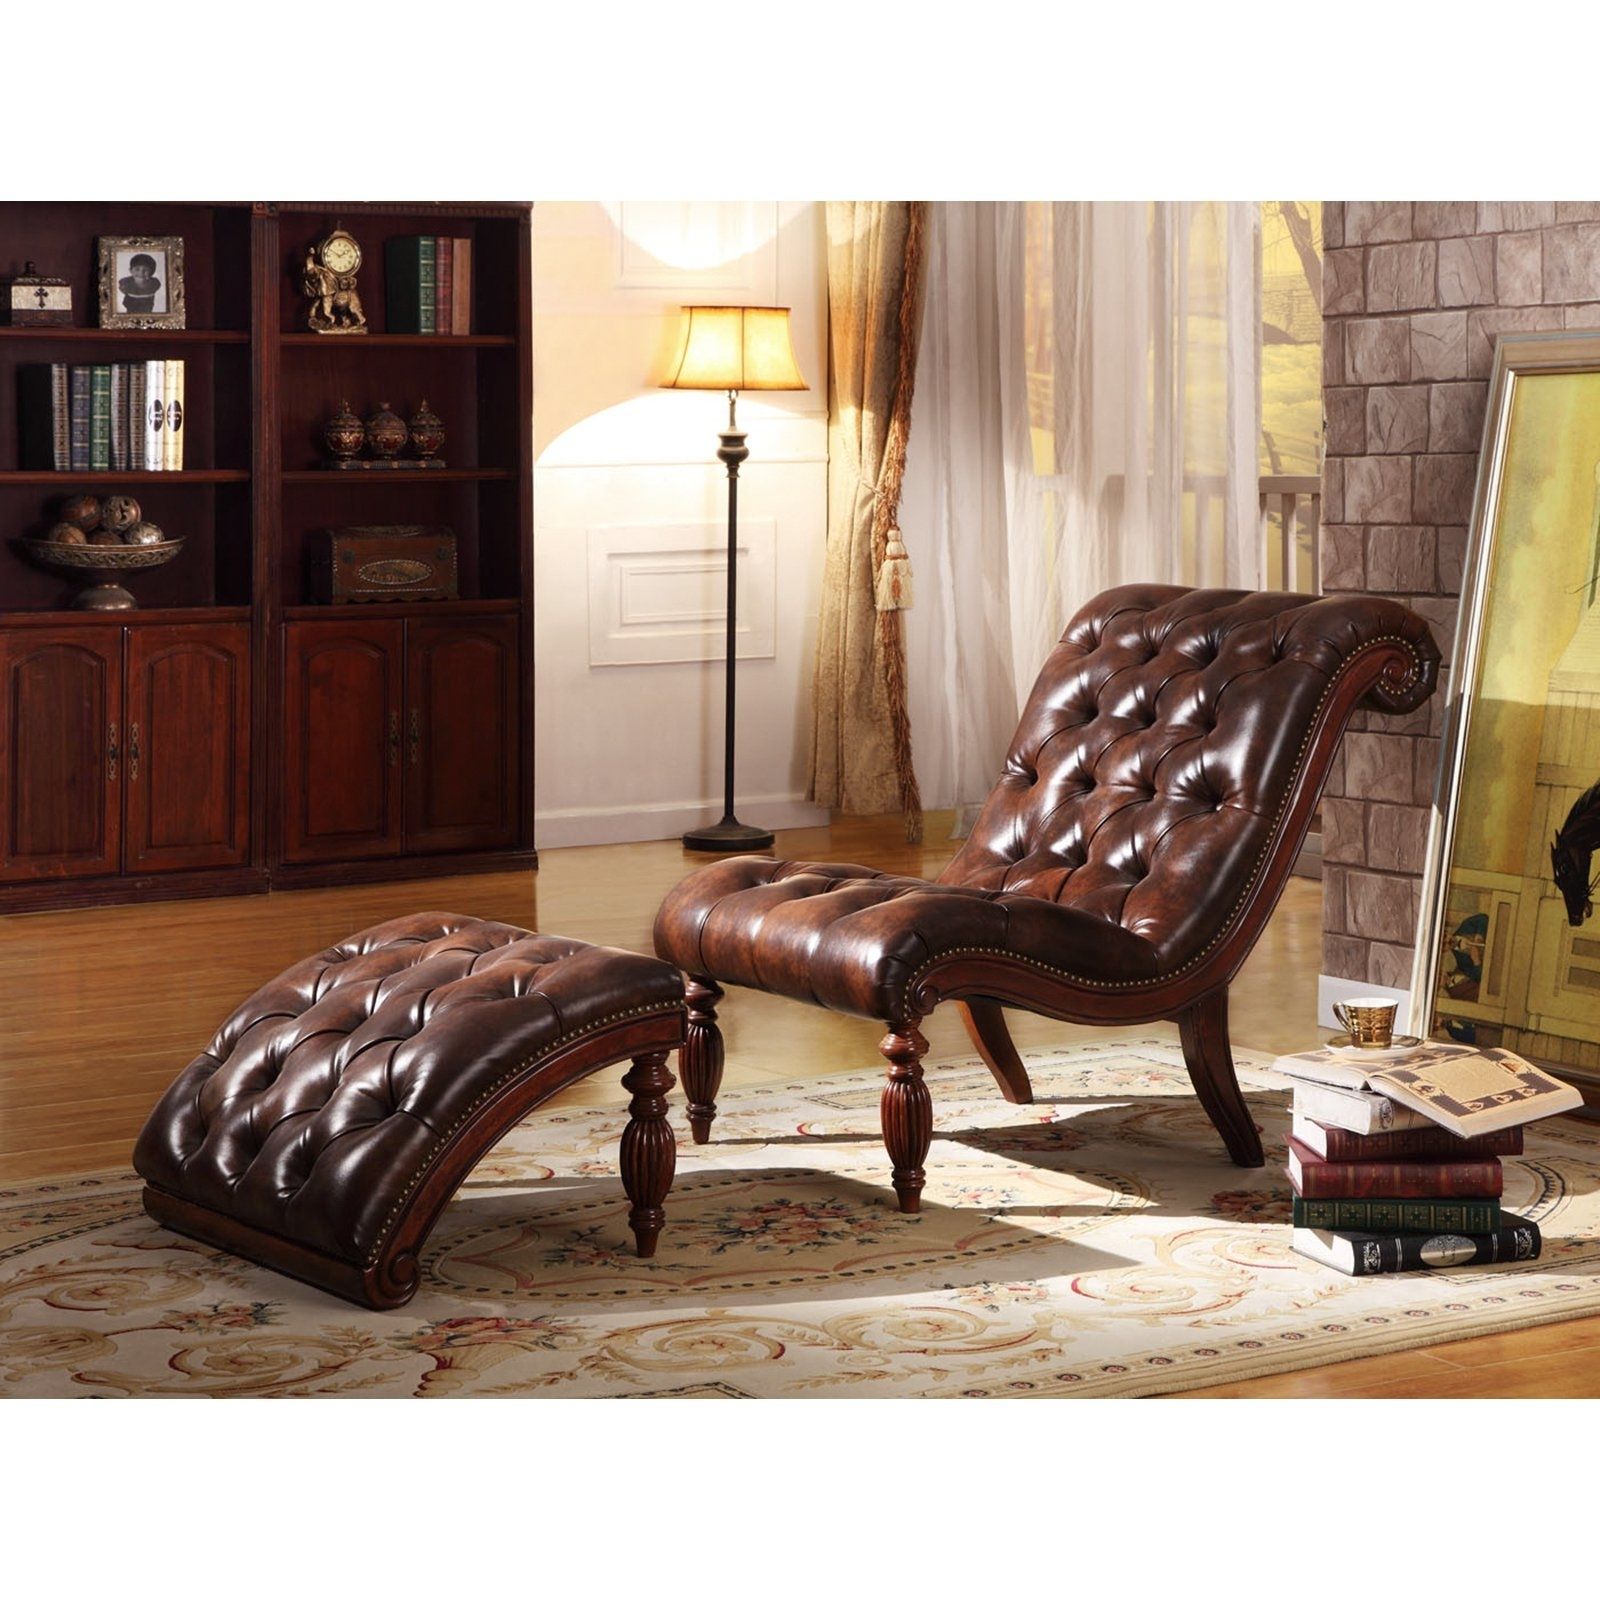 Most Recent Tufted Leather Chaises Intended For Weston Home Bonded Leather Button Tufted Chaise And Ottoman – Warm (View 2 of 15)